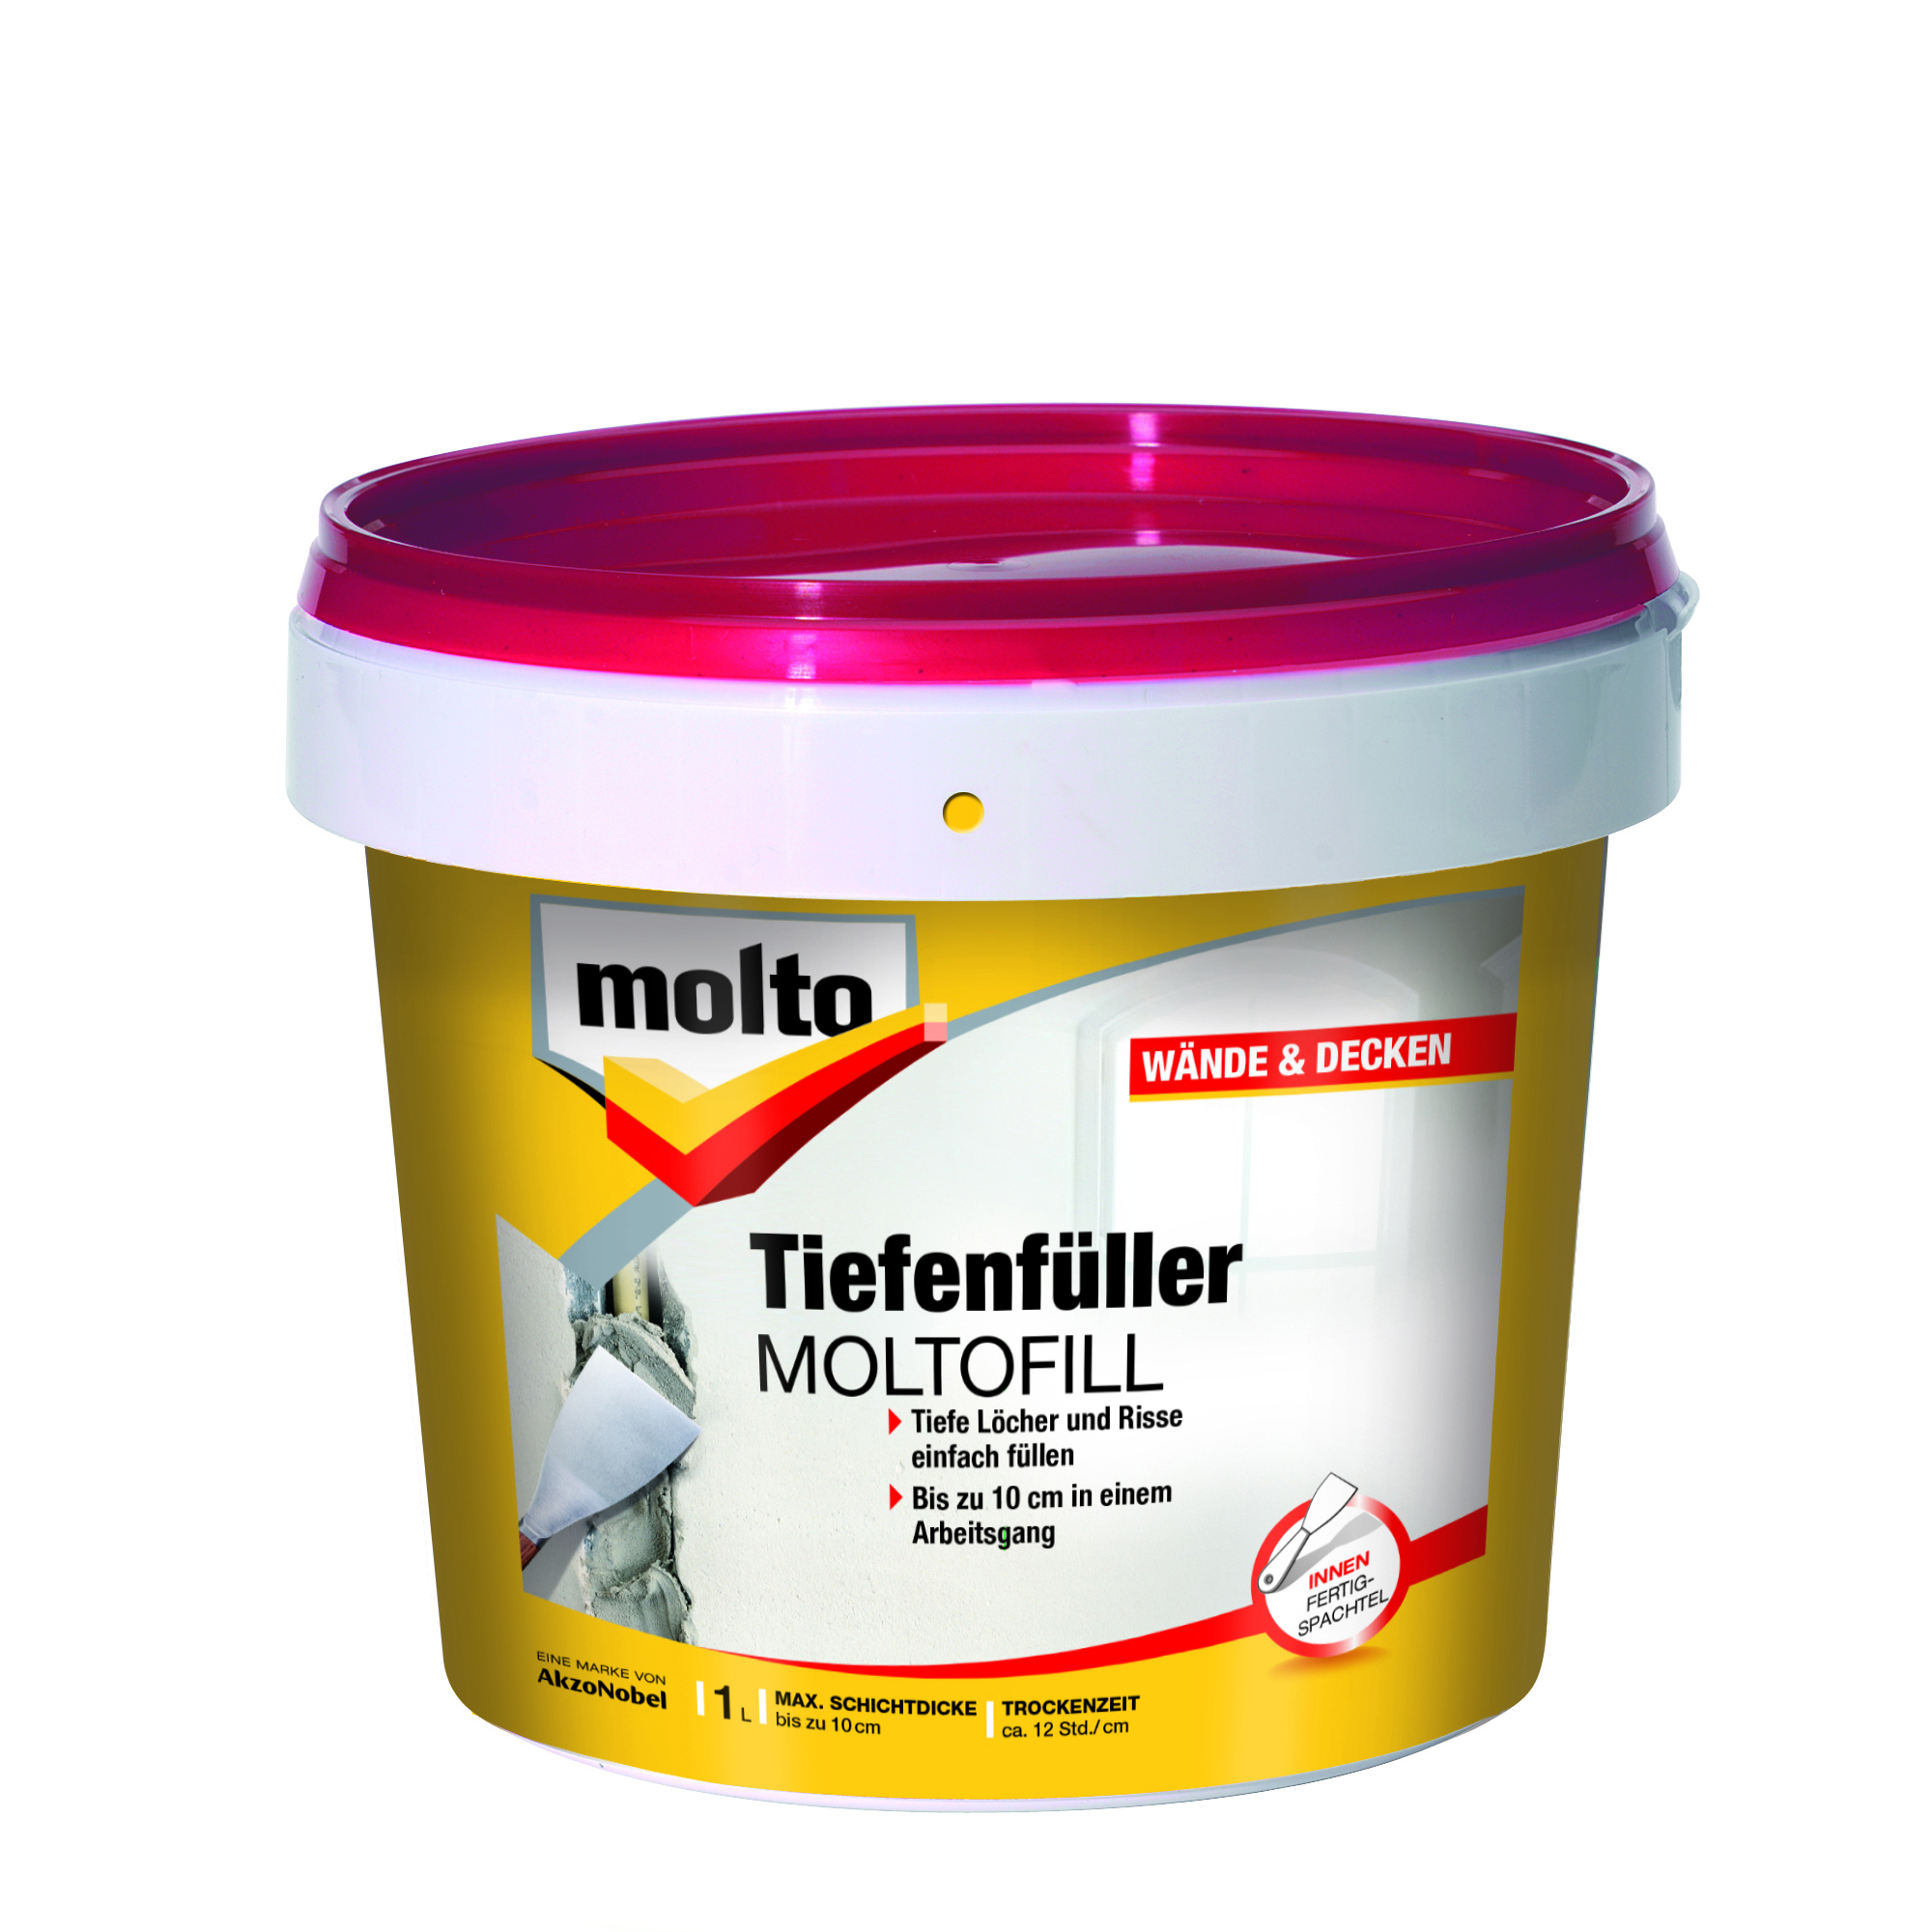 Tiefenfüller 'Moltofill' 1 l + product picture